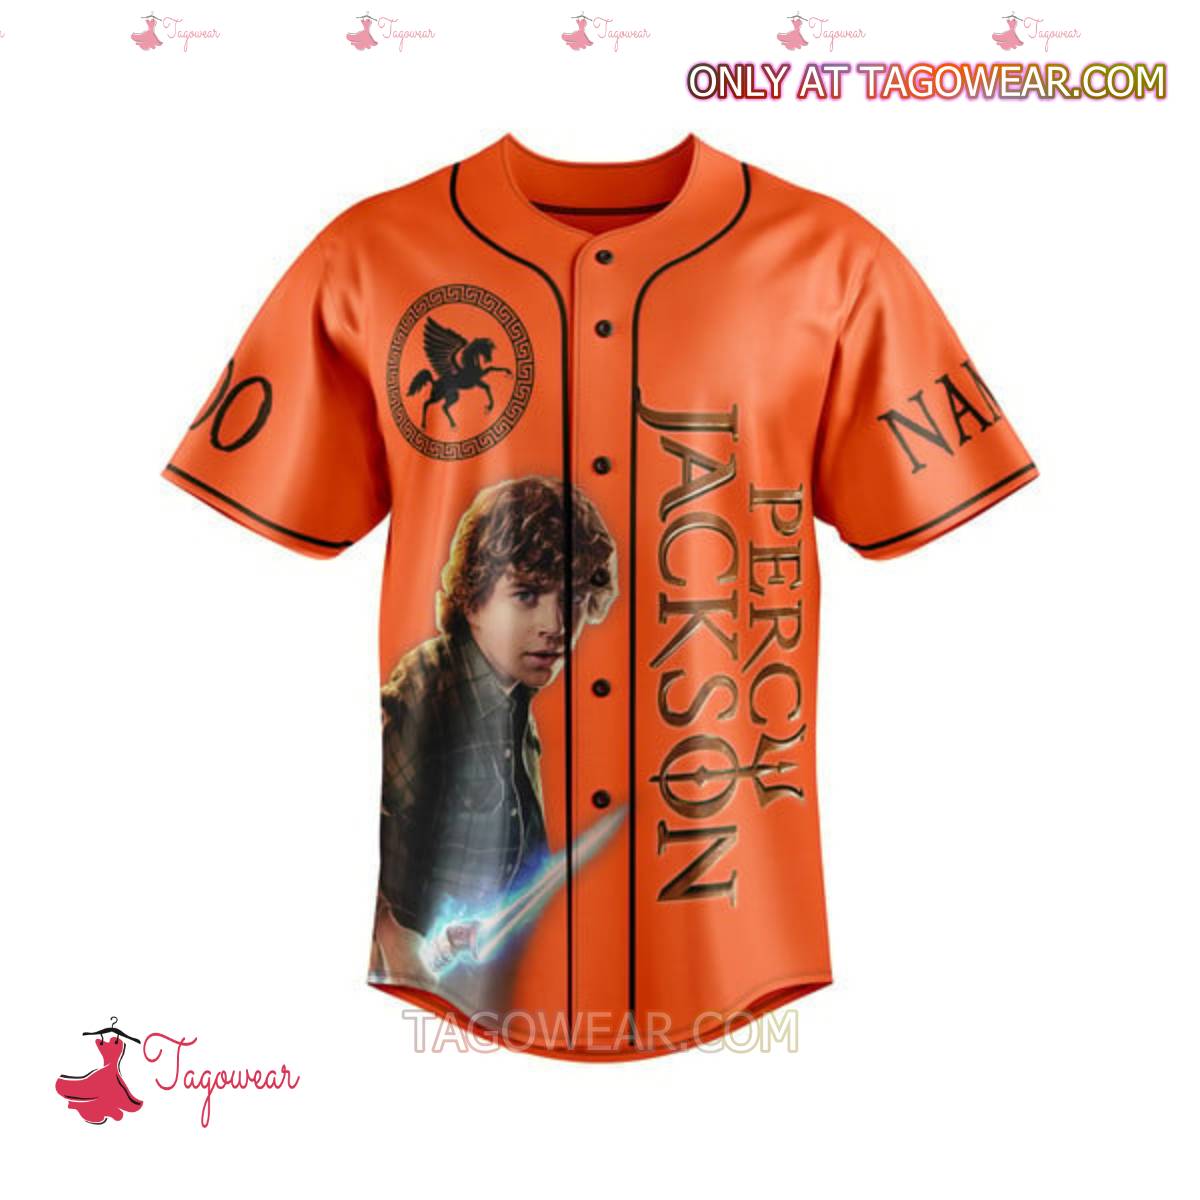 Percy Jackson And The Olympians Look I Didn't Want To Be A Half-blood Personalized Baseball Jersey a